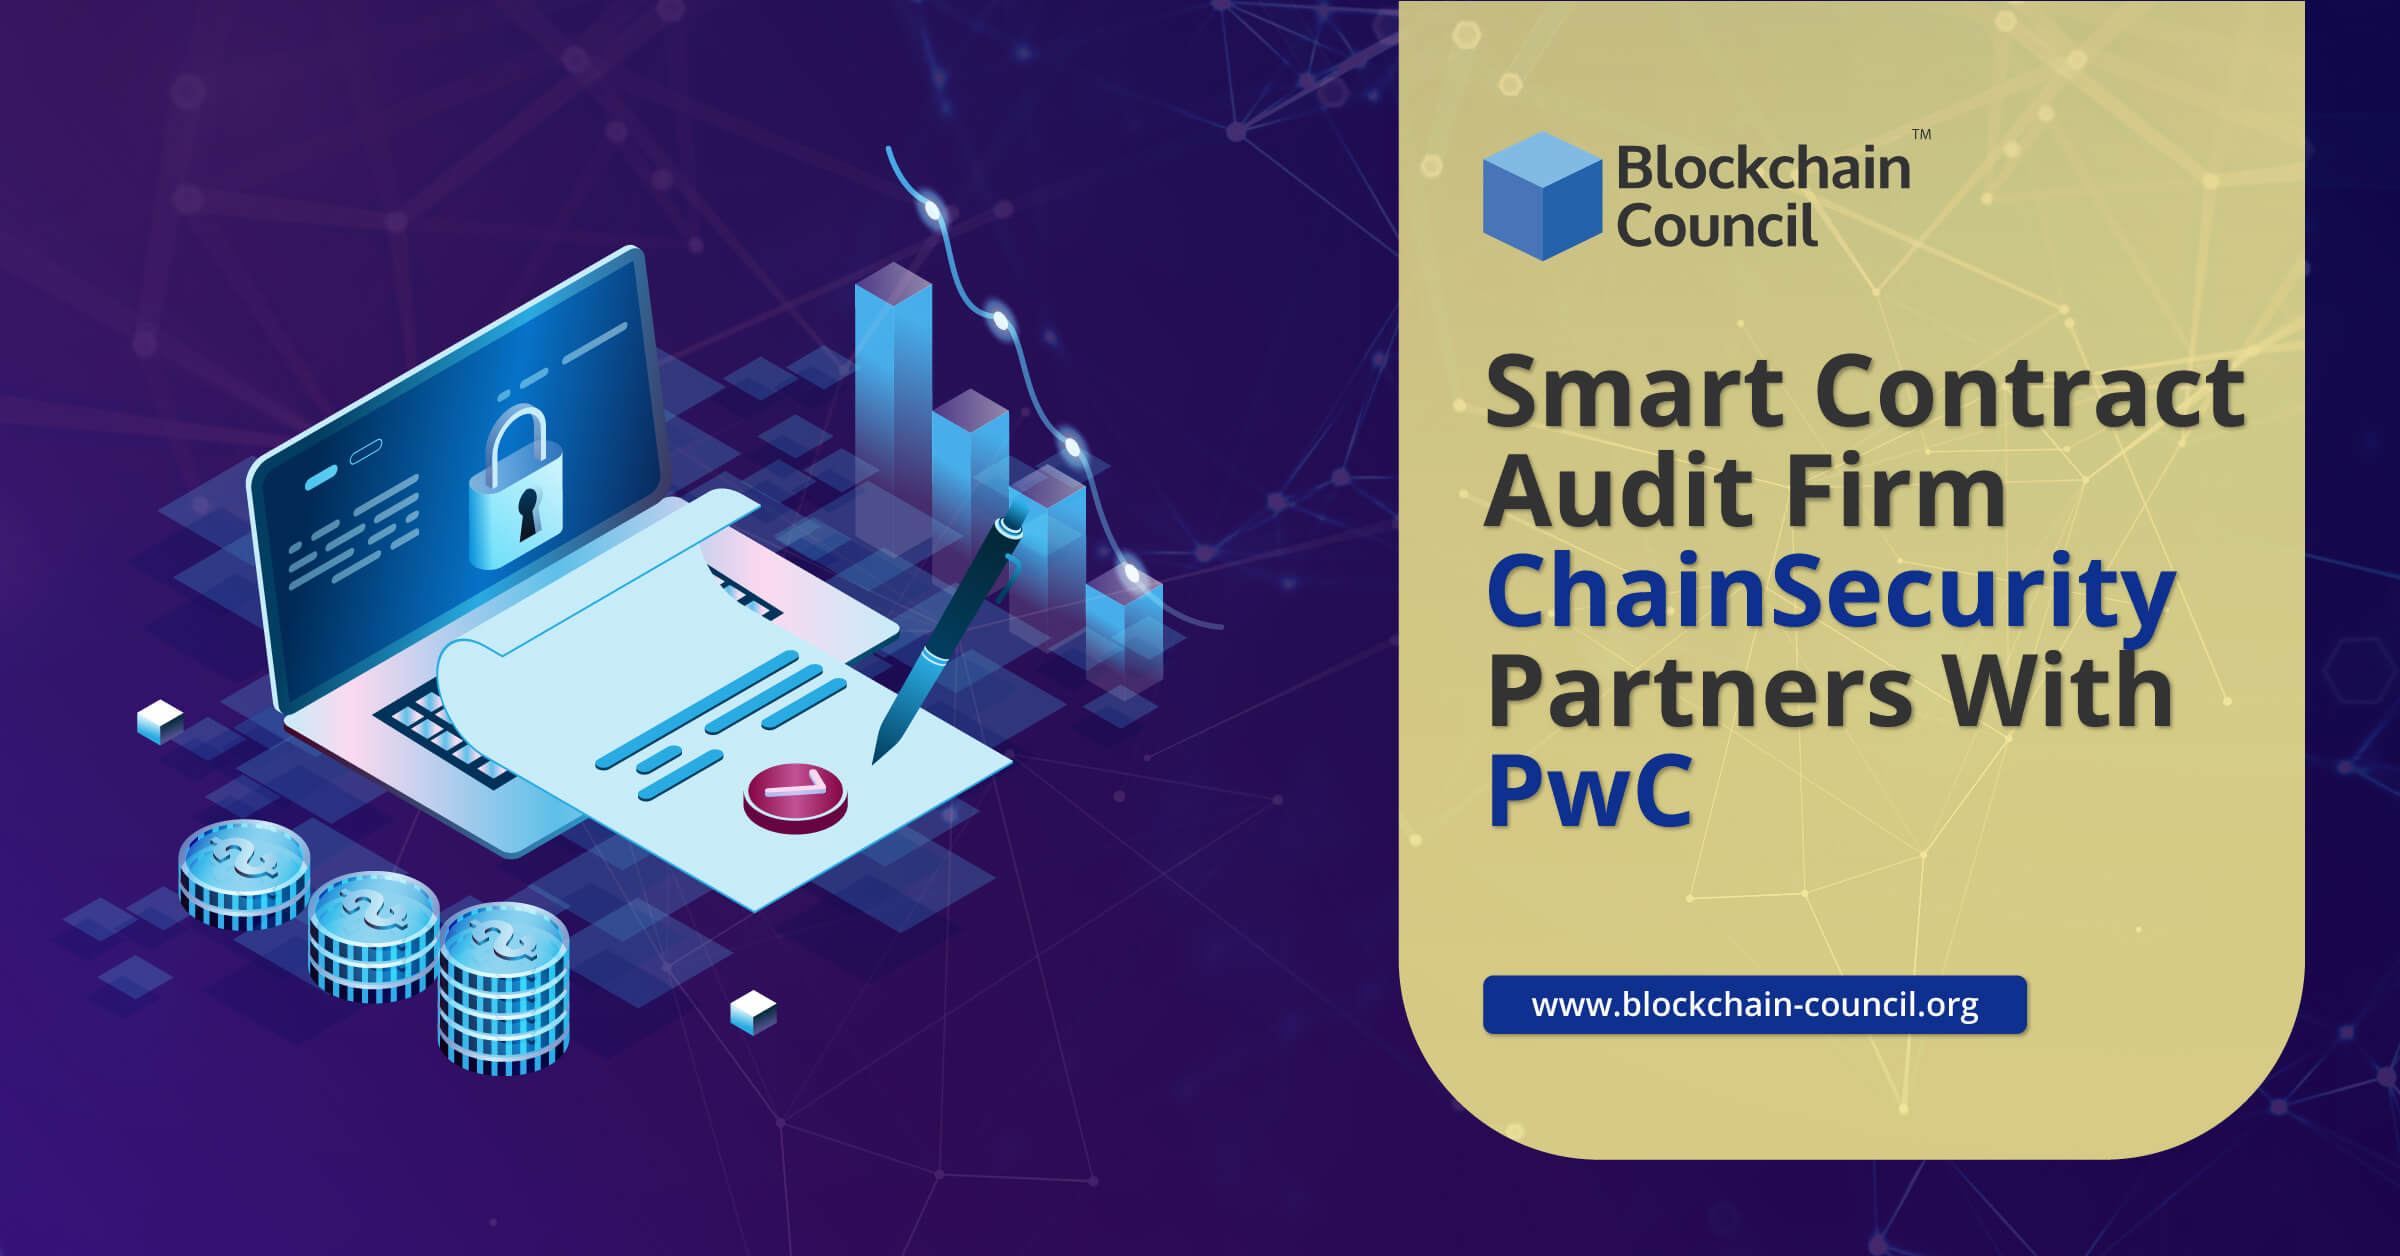 Smart Contract Audit Firm ChainSecurity Partners With PwC